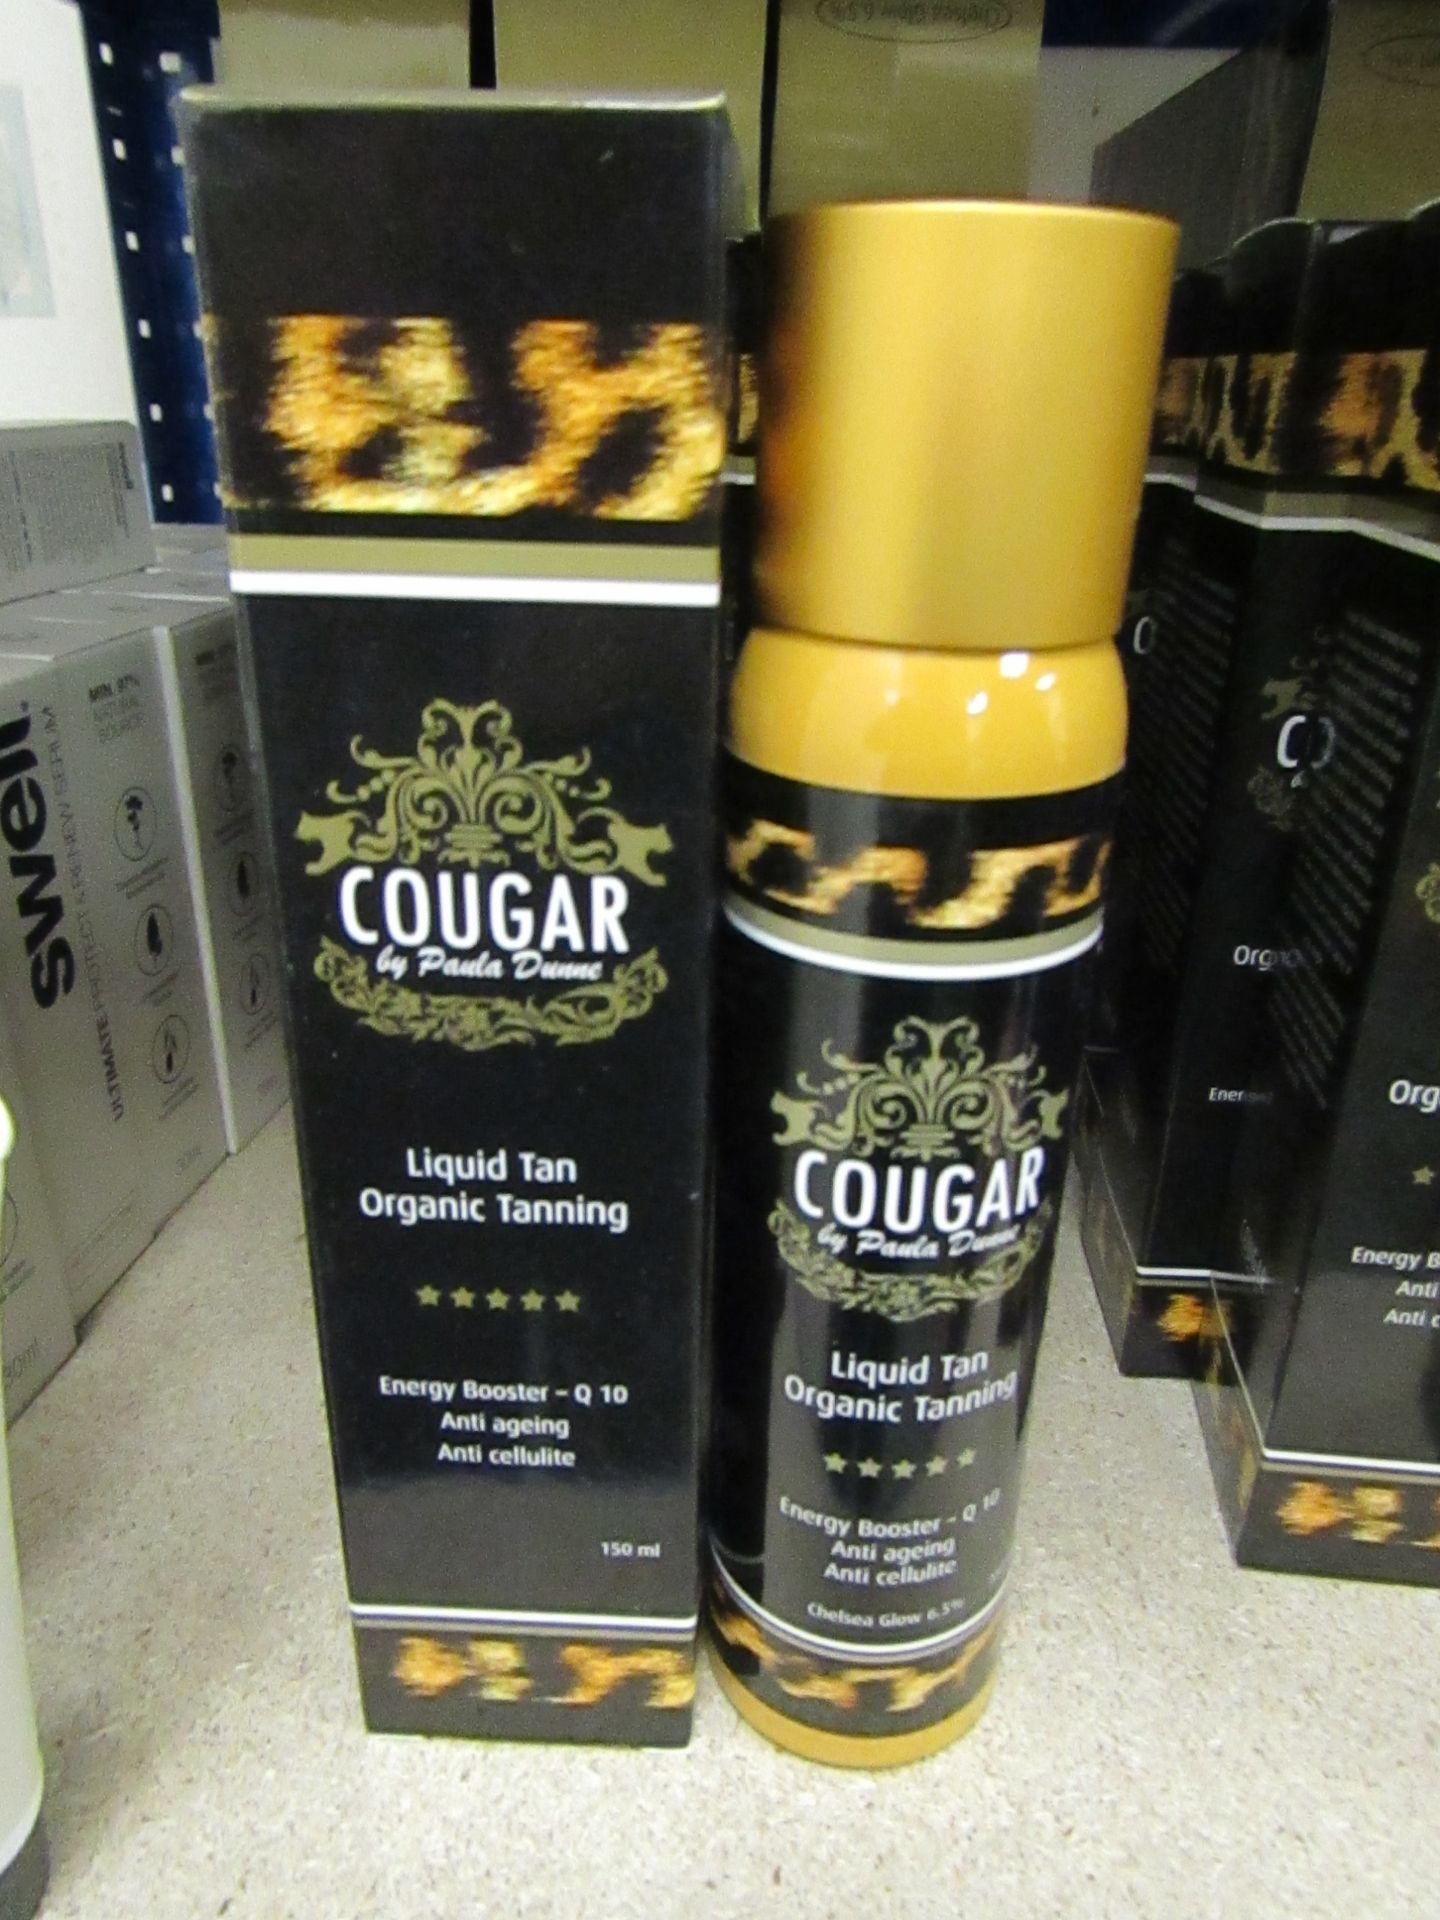 2 x Cougar 150ml Chelsea Glow 6.5% Organic Tanning Liquid Tan, both brand new and boxed.